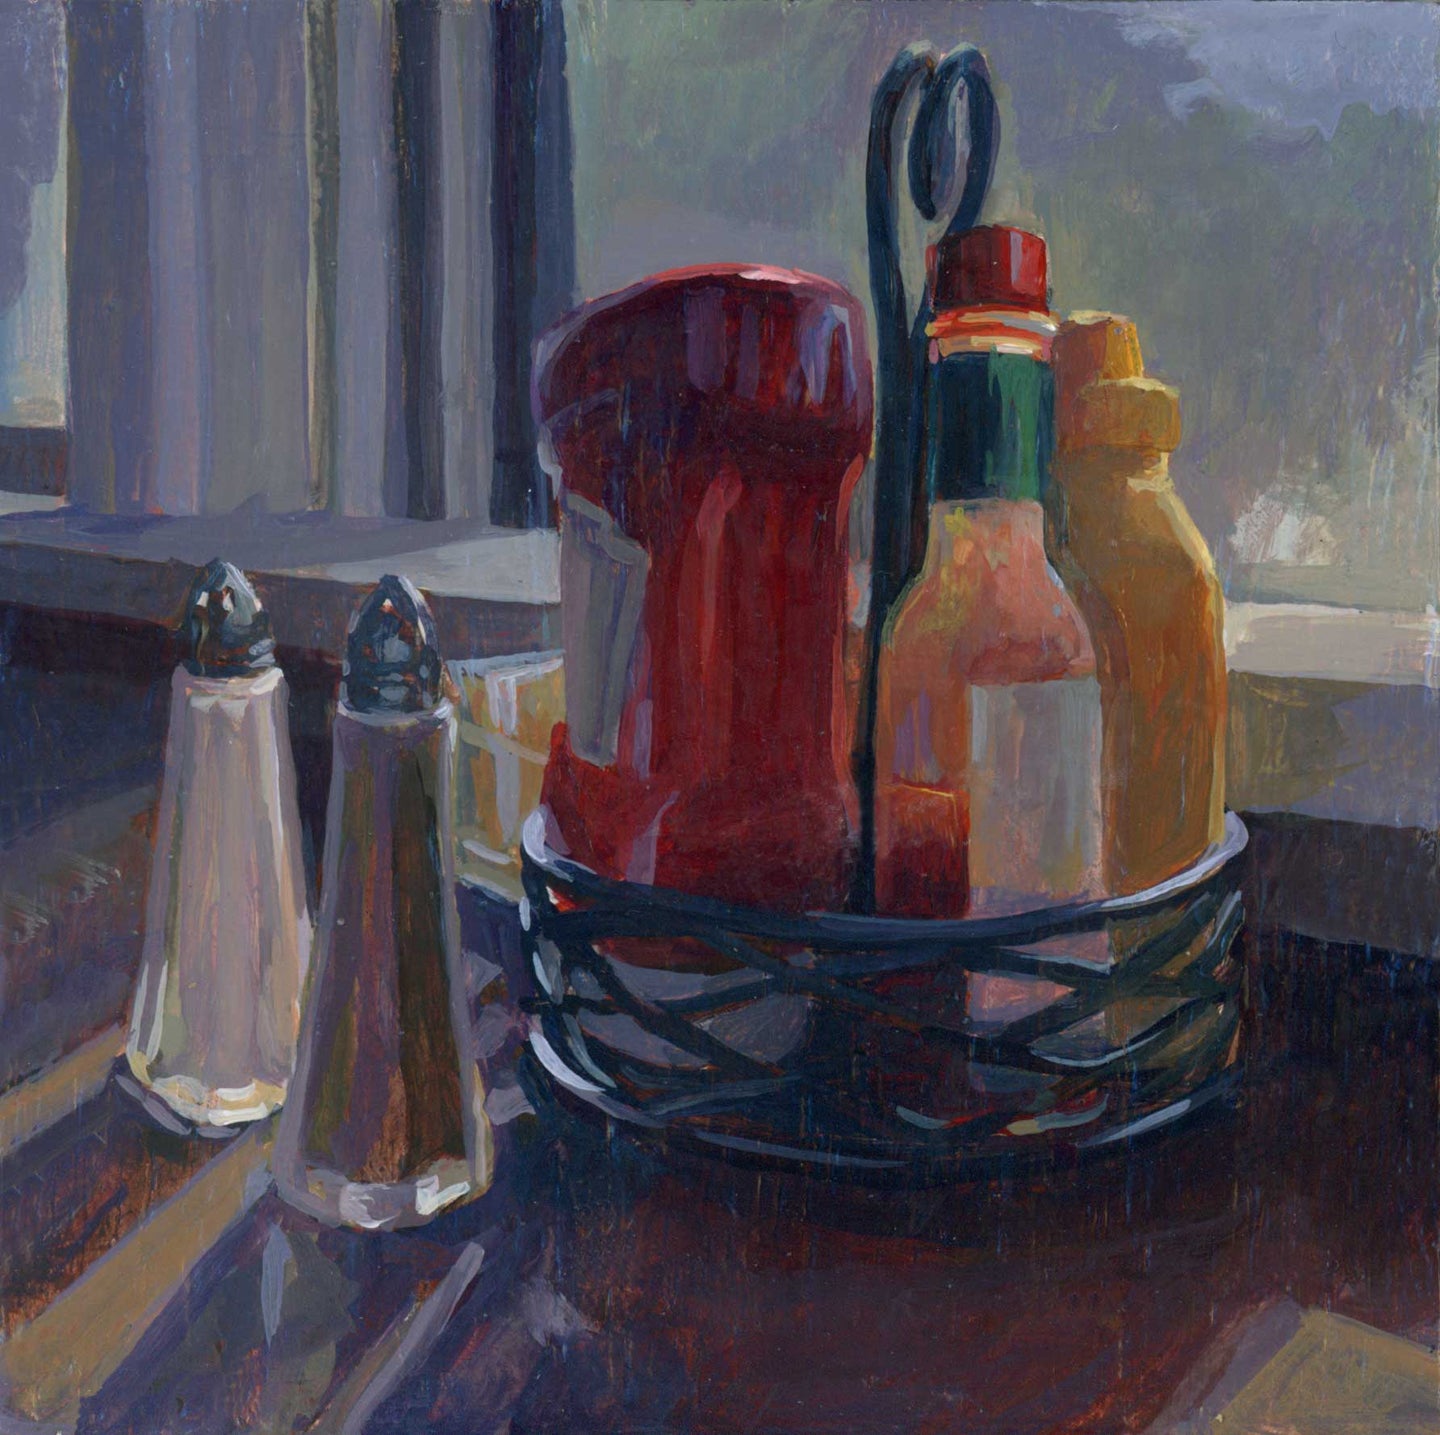 82. Diner Condiments by the Window